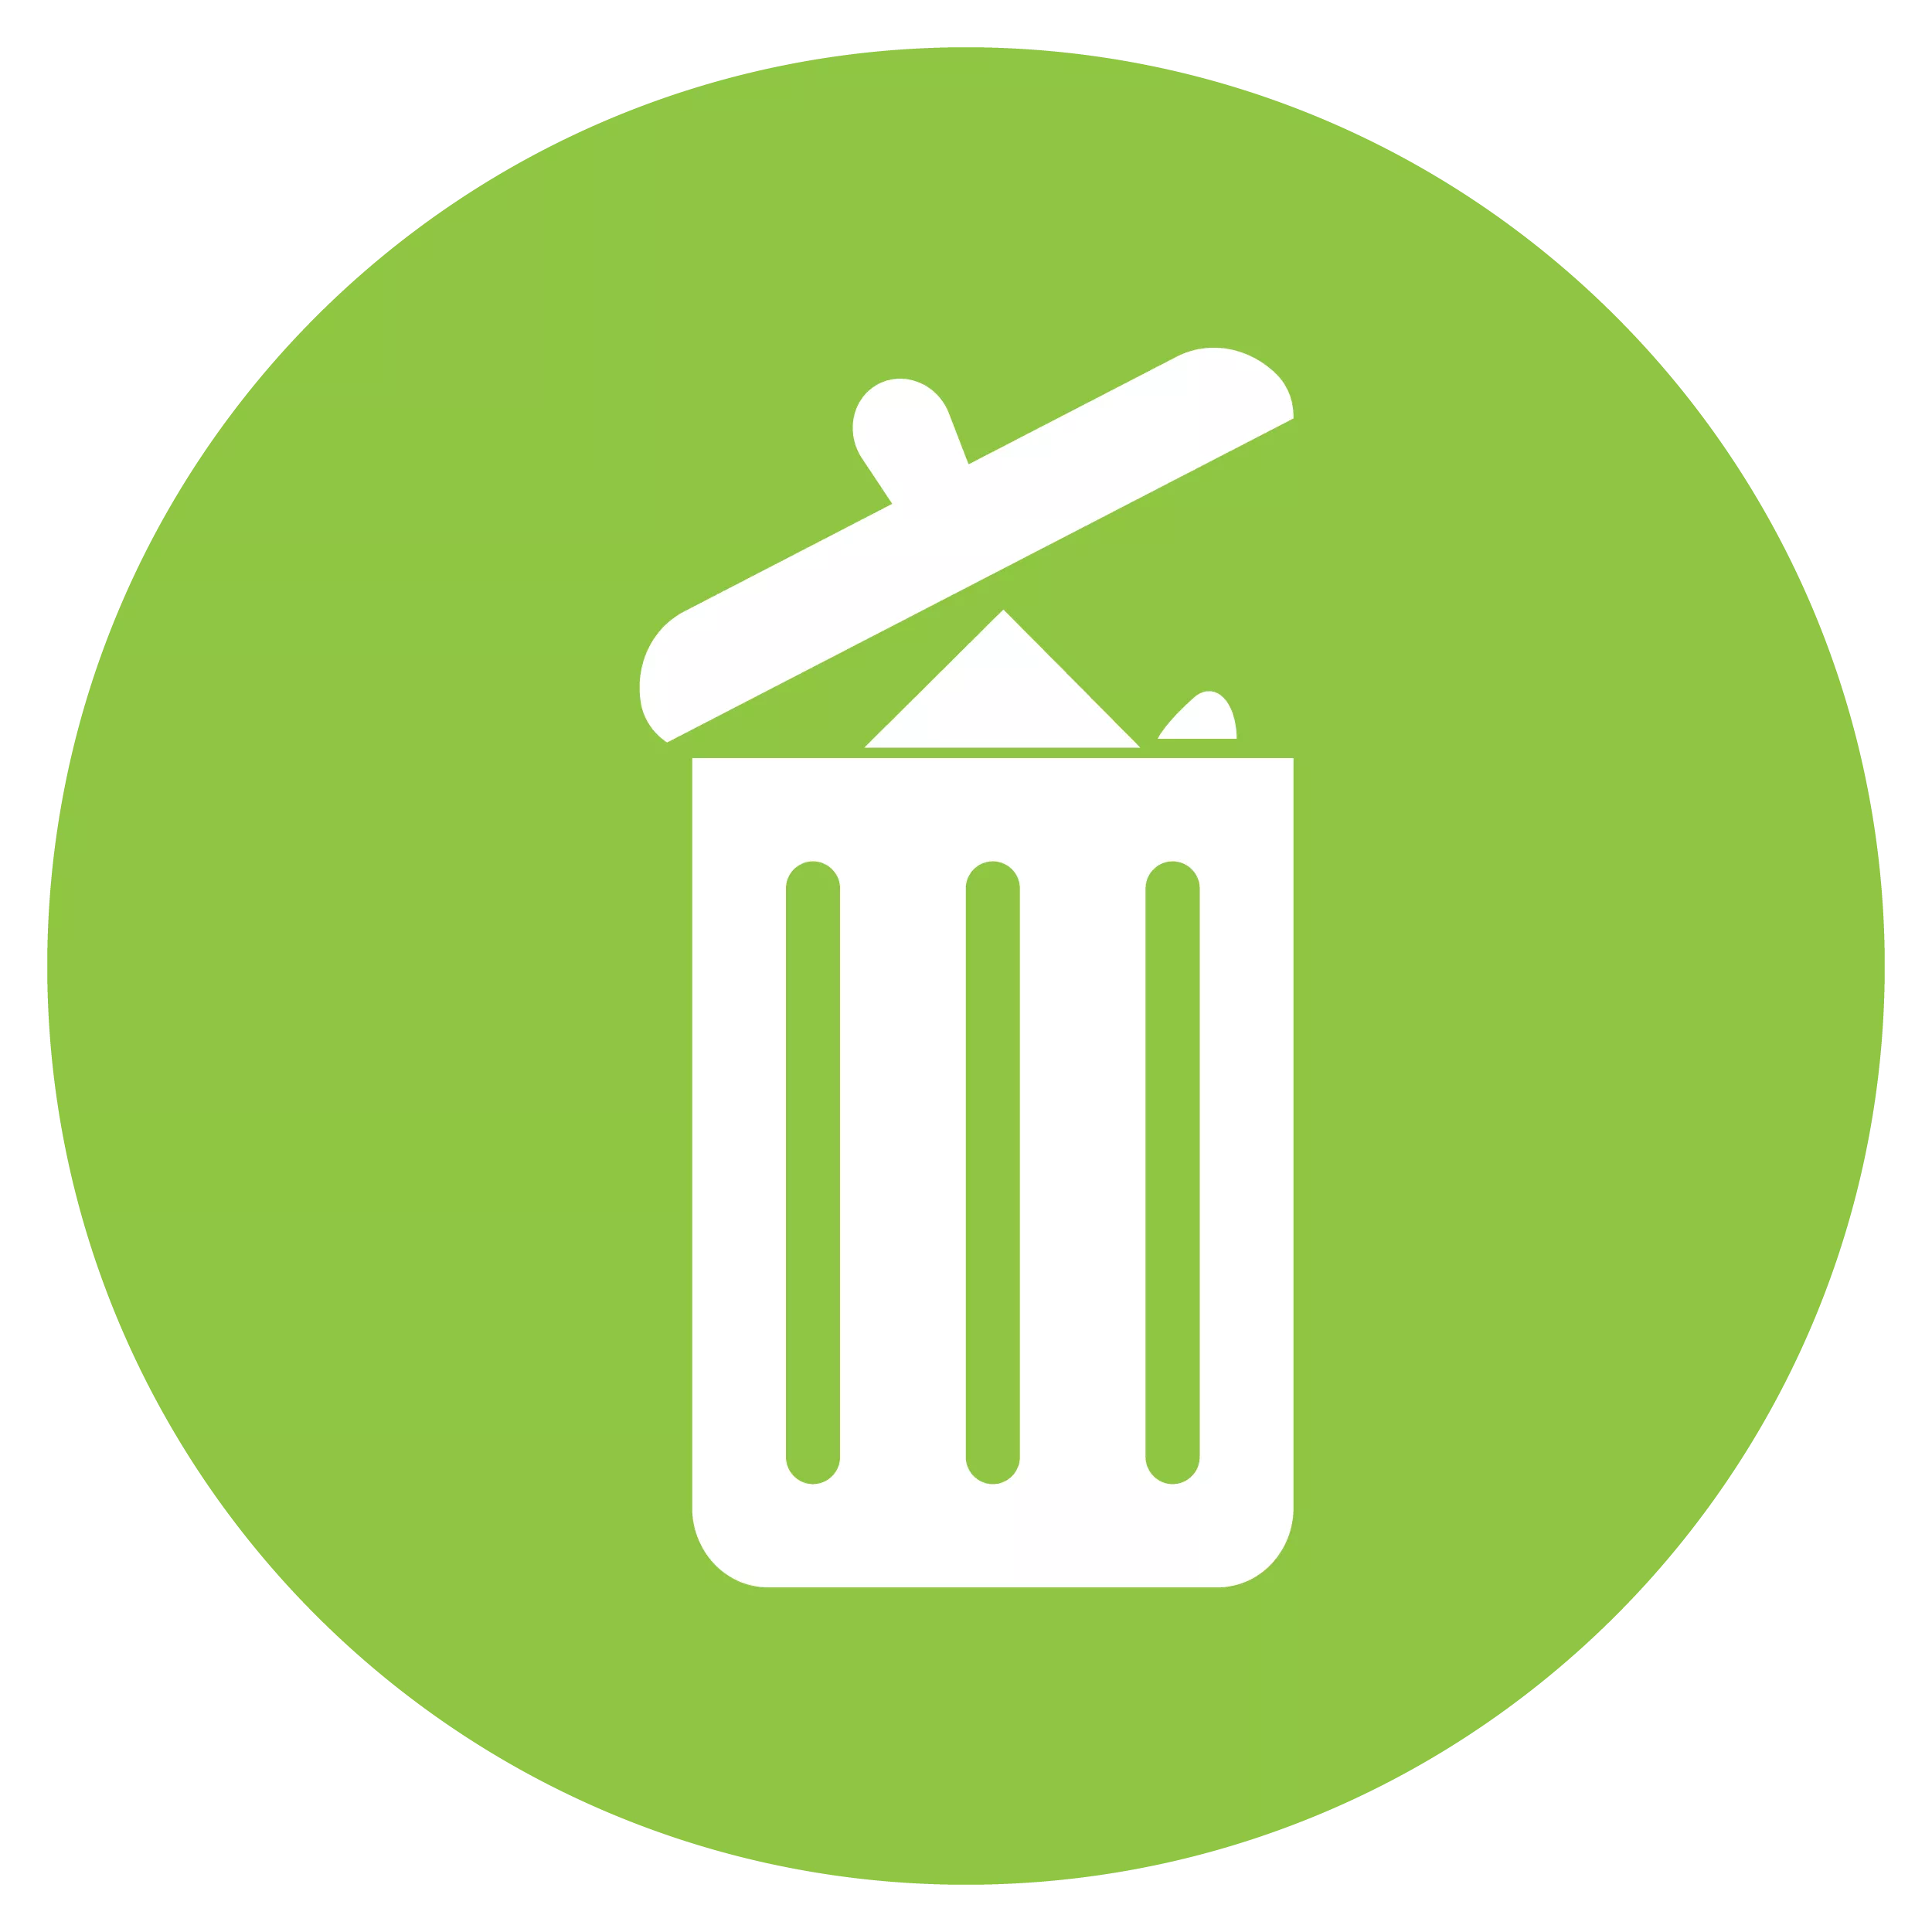 Reduced Product and Packaging Waste Logo - Trash Can on Green